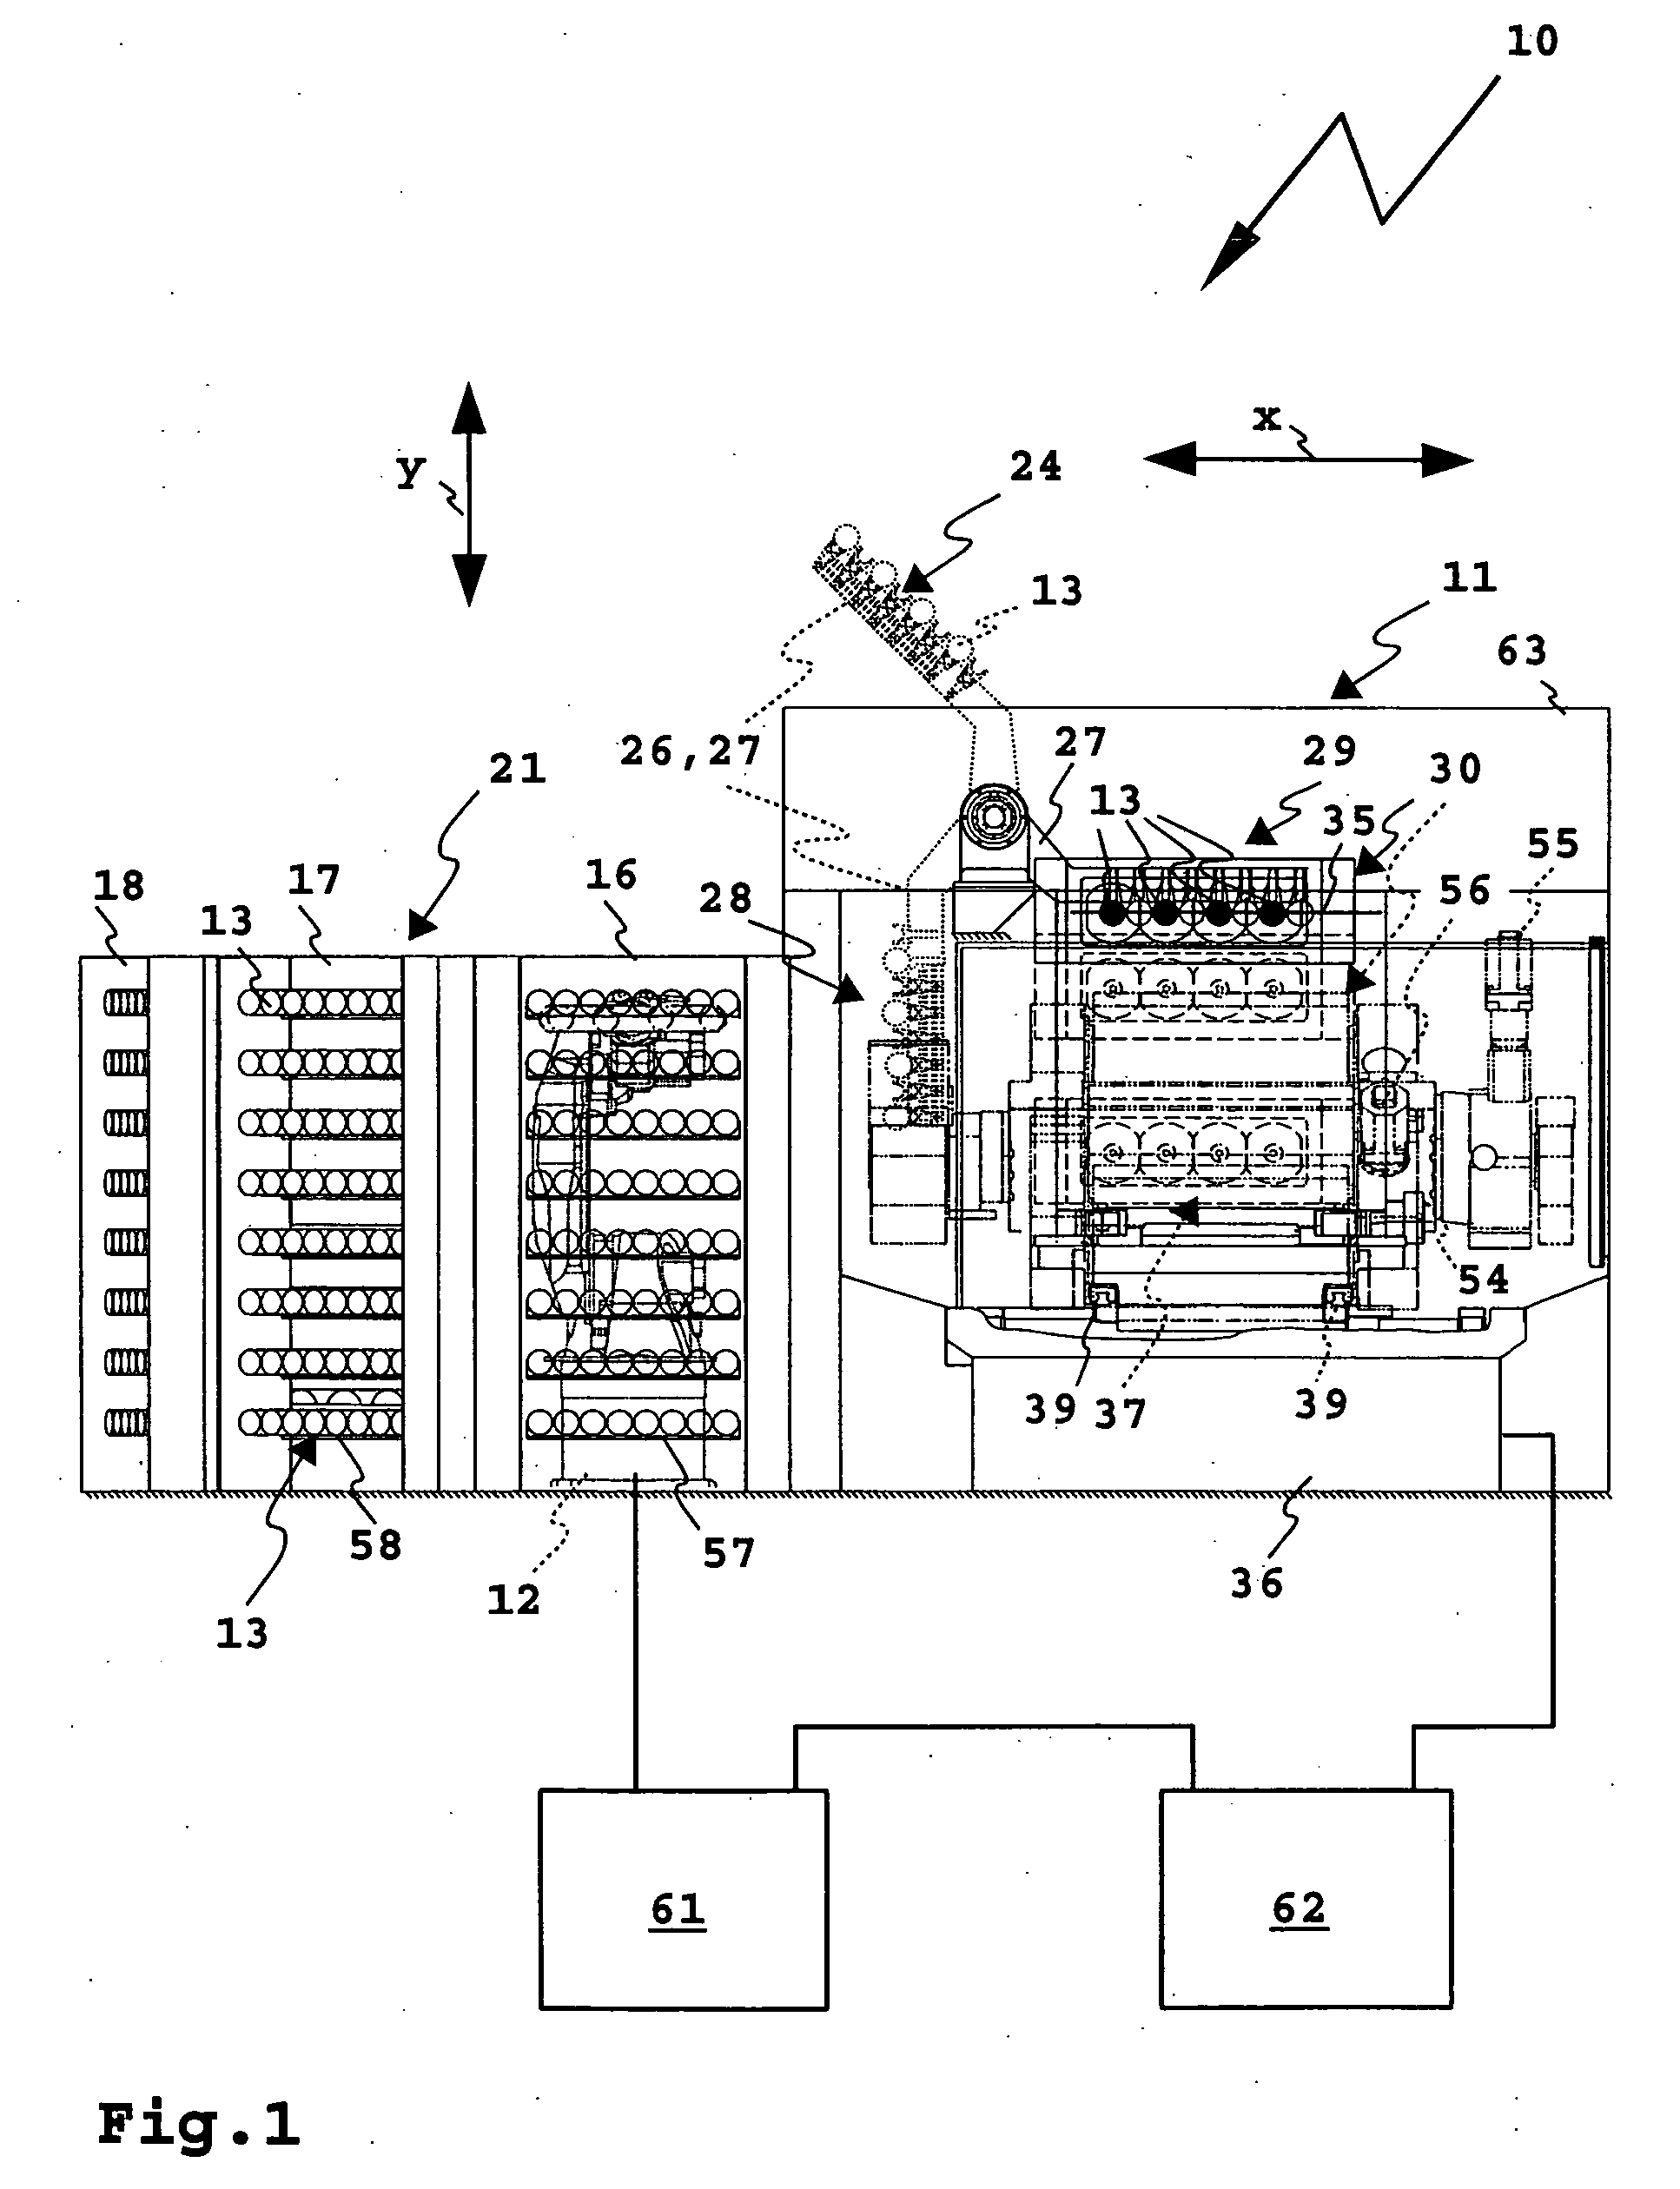 Processing machine arrangement with robot and a tool magazine